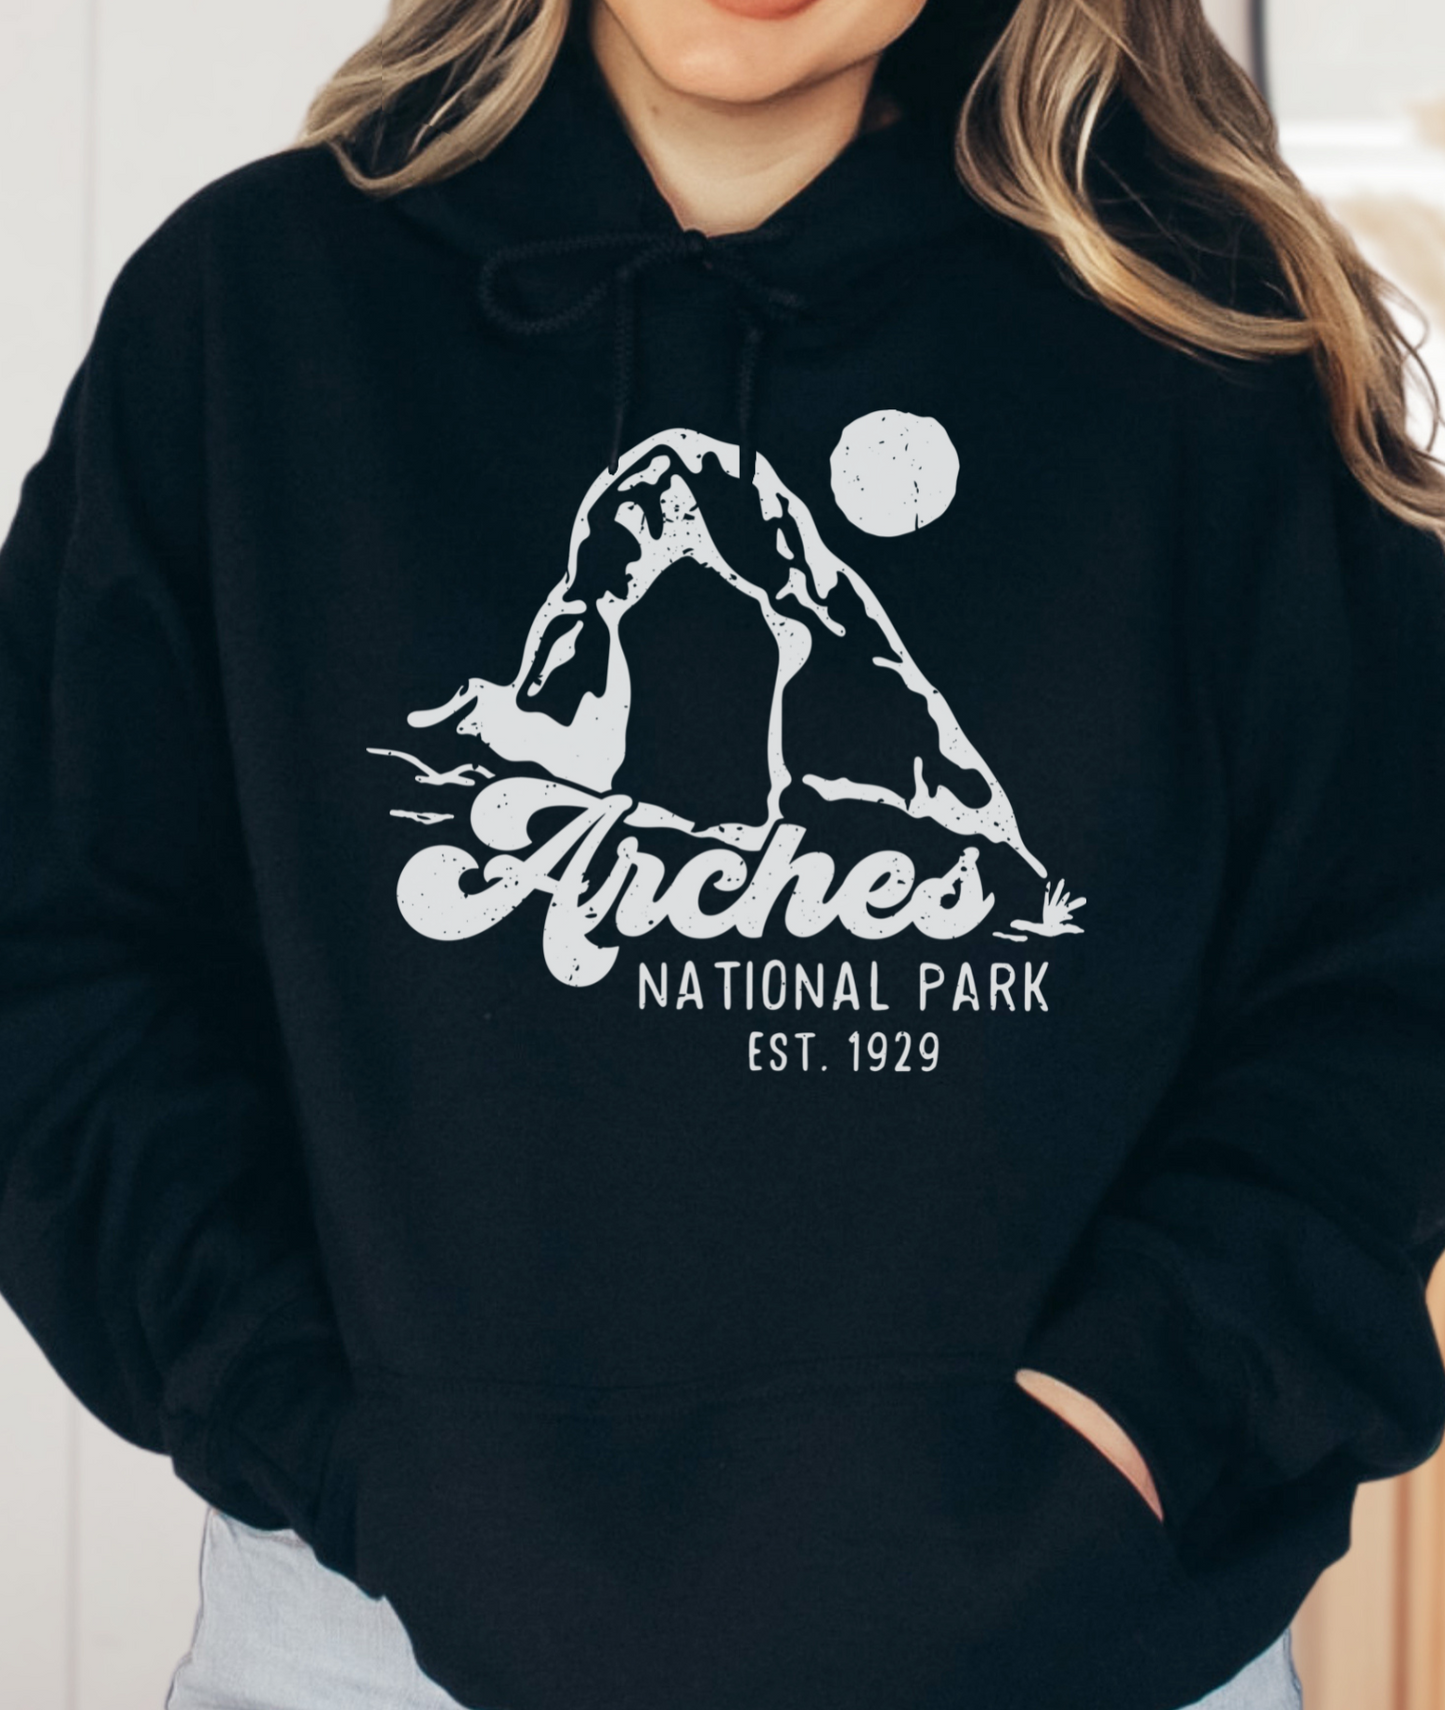 Arches National Park Unisex Hoodie